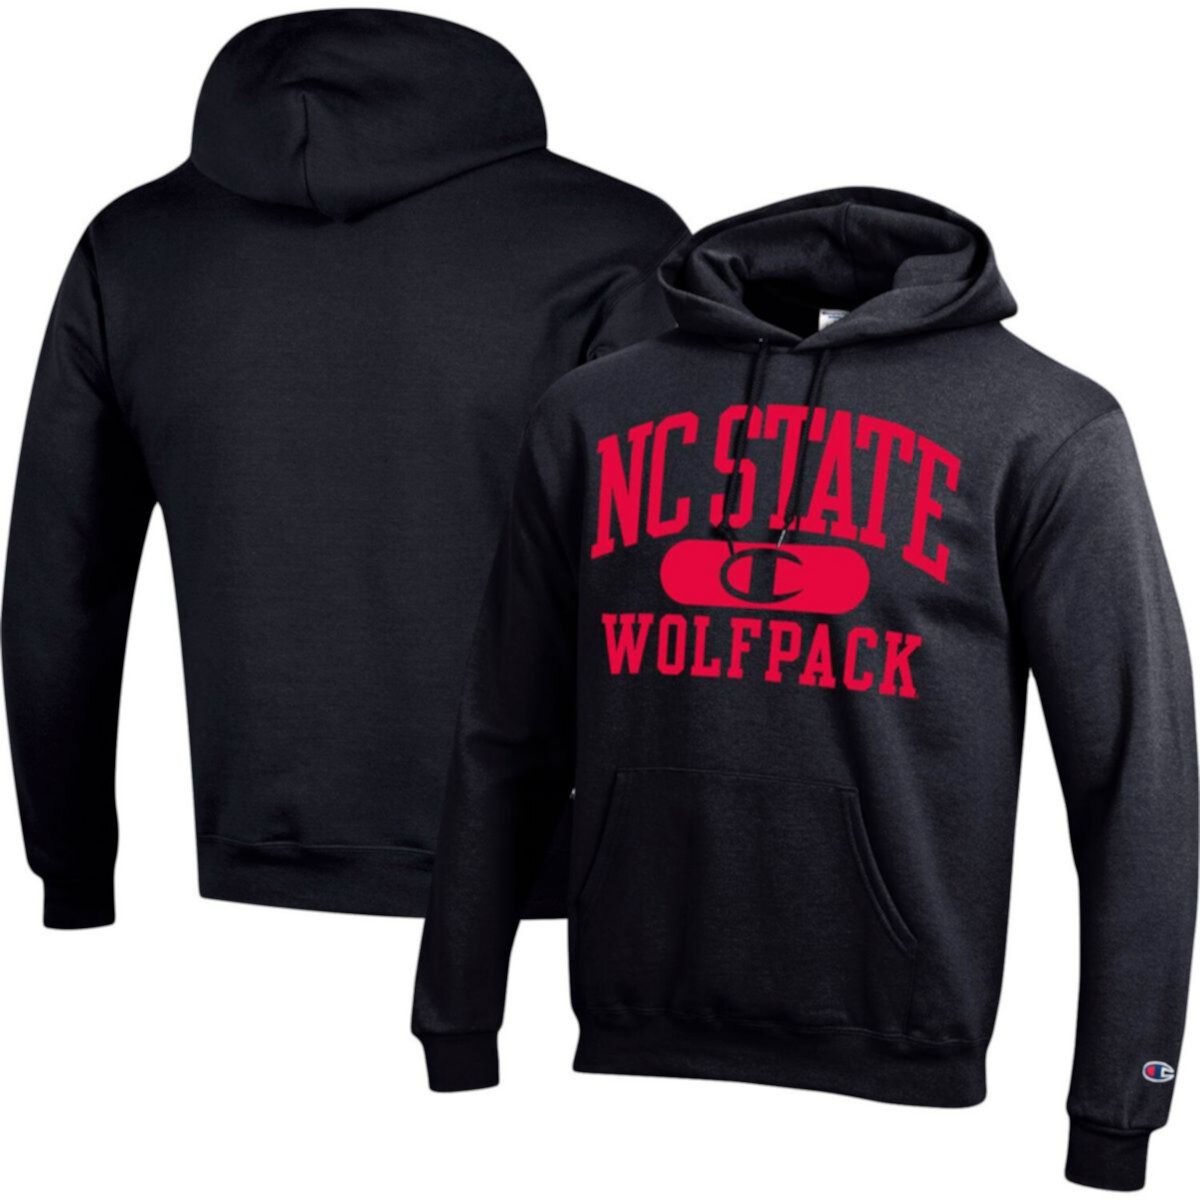 Men's Champion Black NC State Wolfpack Arch Pill Pullover Hoodie Champion